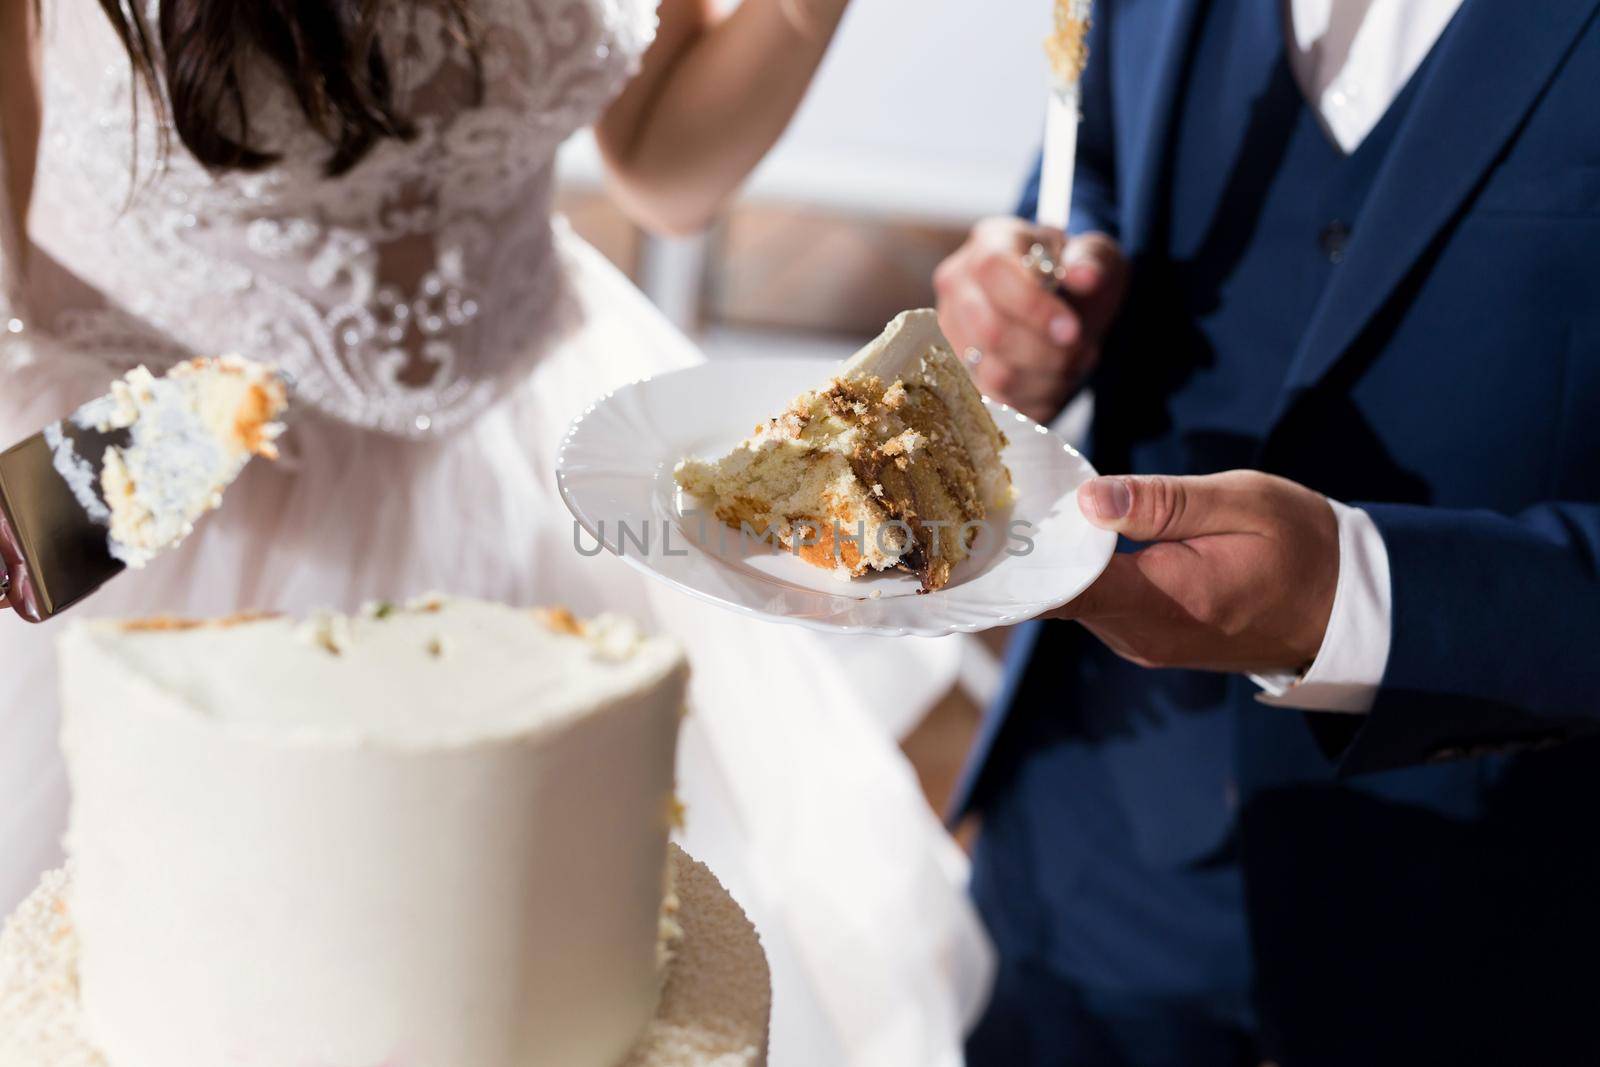 The bride and groom cut a gorgeous wedding cake at a banquet by StudioPeace